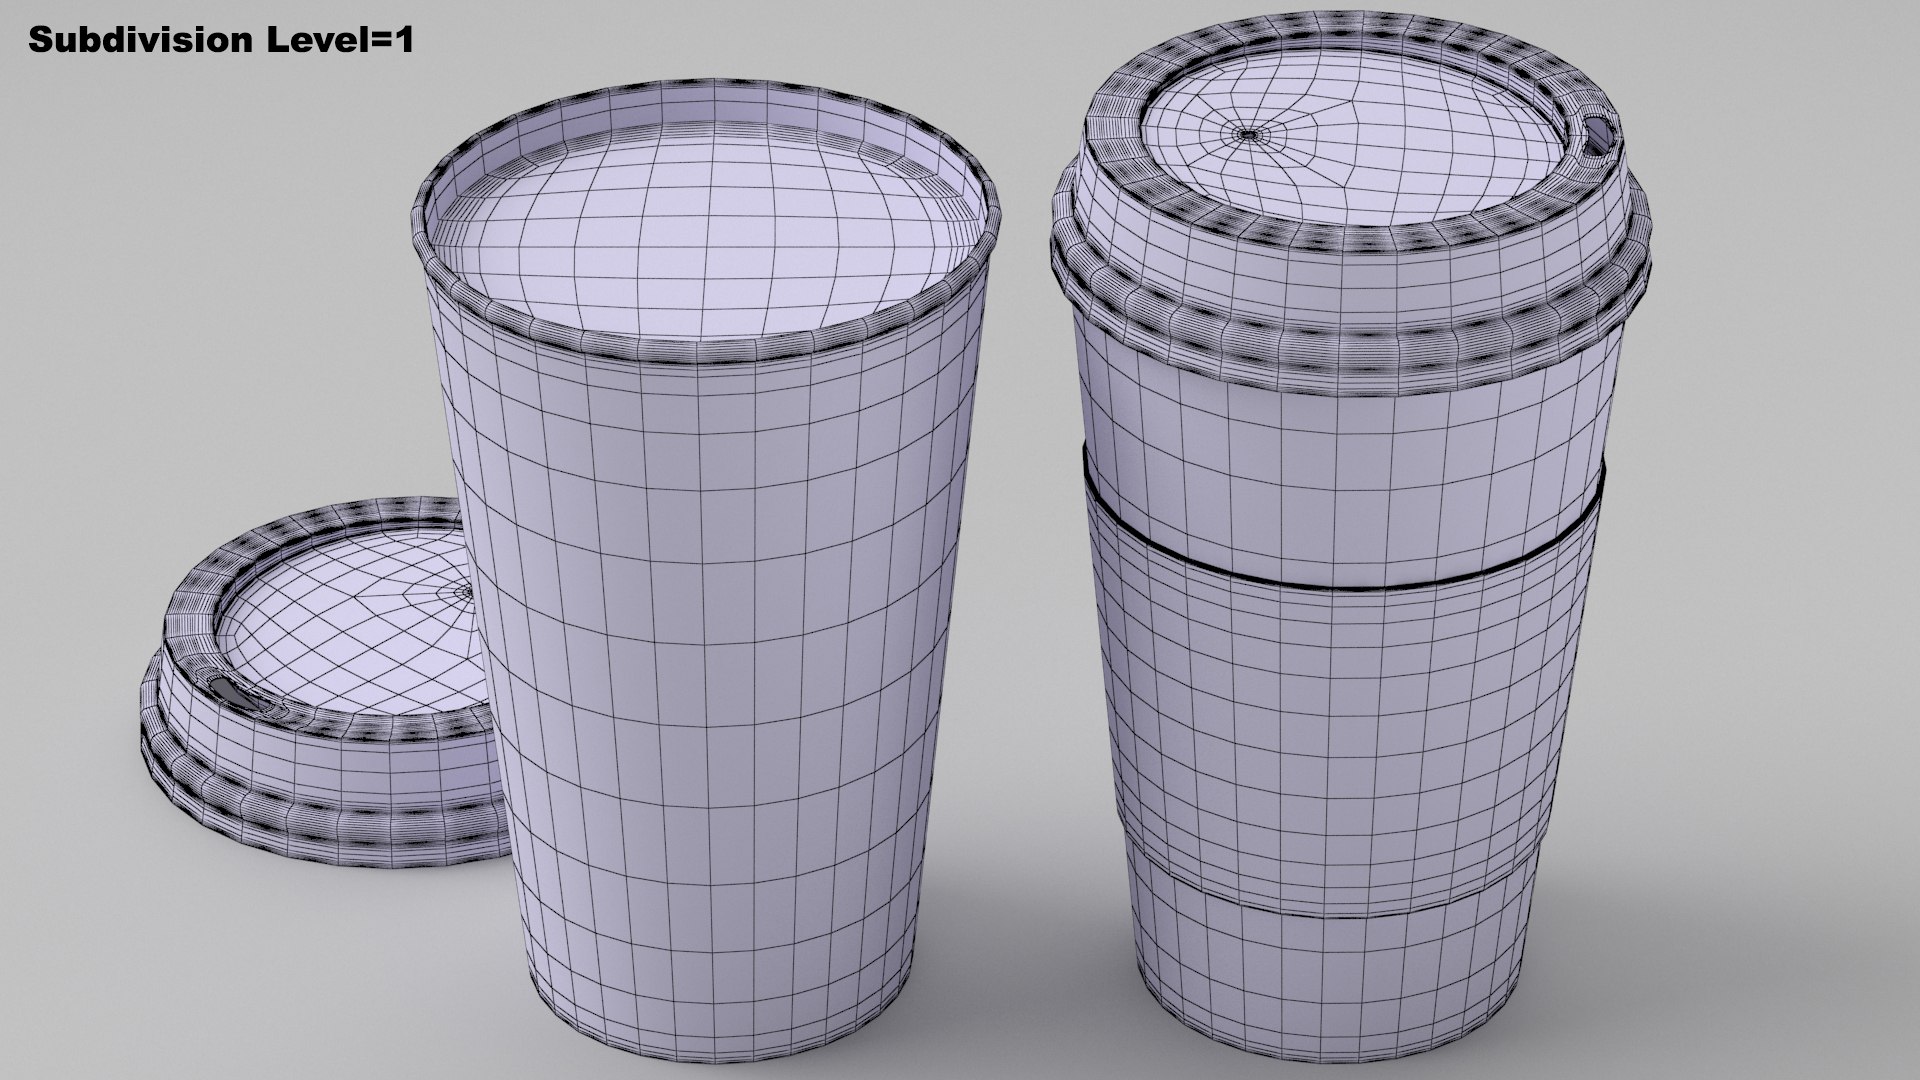 Coffee Paper Cup With Lid and Stopper 3D model - TurboSquid 2135372